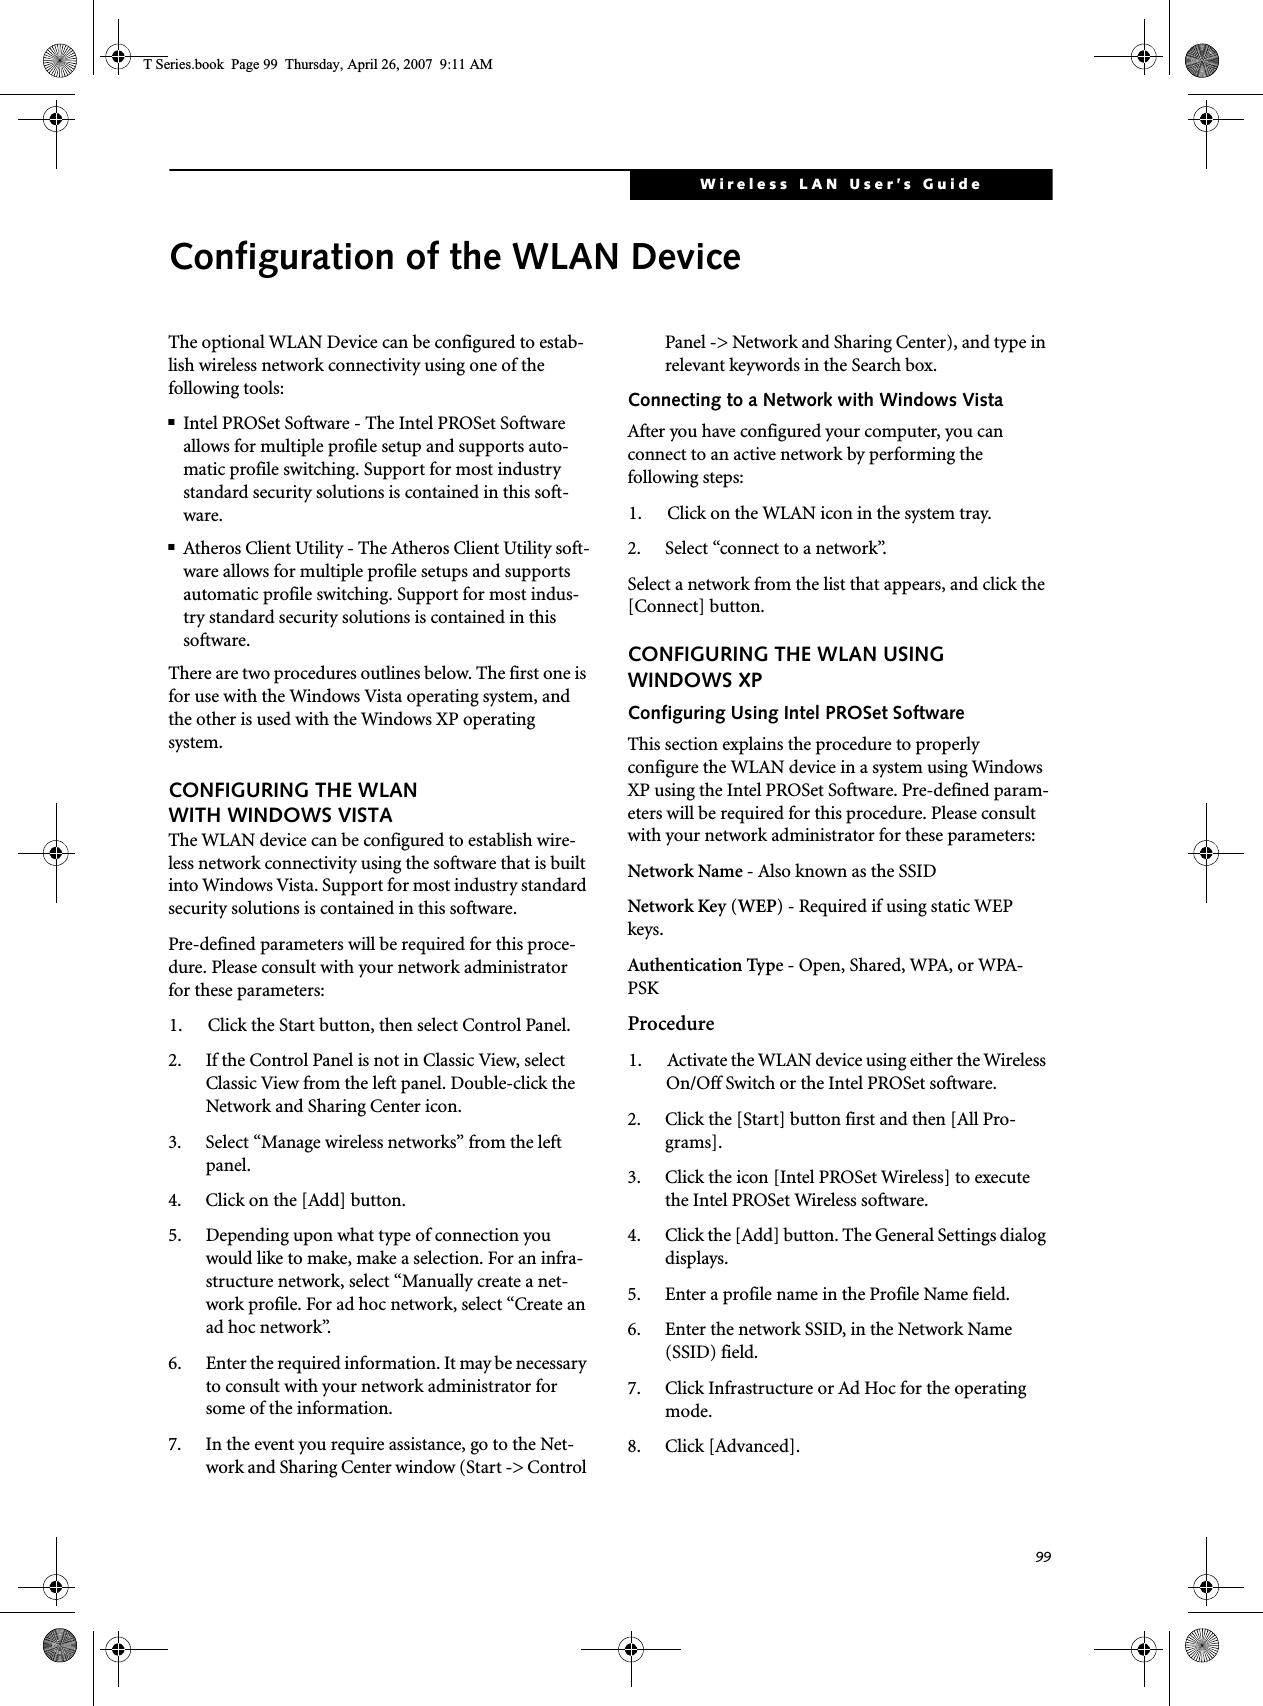 99Wireless LAN User’s Guide Configuration of the WLAN DeviceThe optional WLAN Device can be configured to estab-lish wireless network connectivity using one of the following tools:■Intel PROSet Software - The Intel PROSet Software allows for multiple profile setup and supports auto-matic profile switching. Support for most industry standard security solutions is contained in this soft-ware.■Atheros Client Utility - The Atheros Client Utility soft-ware allows for multiple profile setups and supports automatic profile switching. Support for most indus-try standard security solutions is contained in this software.There are two procedures outlines below. The first one is for use with the Windows Vista operating system, and the other is used with the Windows XP operating system.CONFIGURING THE WLAN WITH WINDOWS VISTAThe WLAN device can be configured to establish wire-less network connectivity using the software that is built into Windows Vista. Support for most industry standard security solutions is contained in this software.Pre-defined parameters will be required for this proce-dure. Please consult with your network administrator for these parameters:1. Click the Start button, then select Control Panel.2. If the Control Panel is not in Classic View, select Classic View from the left panel. Double-click the Network and Sharing Center icon.3. Select “Manage wireless networks” from the left panel.4. Click on the [Add] button.5. Depending upon what type of connection you would like to make, make a selection. For an infra-structure network, select “Manually create a net-work profile. For ad hoc network, select “Create an ad hoc network”.6. Enter the required information. It may be necessary to consult with your network administrator for some of the information.7. In the event you require assistance, go to the Net-work and Sharing Center window (Start -&gt; Control Panel -&gt; Network and Sharing Center), and type in relevant keywords in the Search box. Connecting to a Network with Windows VistaAfter you have configured your computer, you can connect to an active network by performing the following steps:1. Click on the WLAN icon in the system tray.2. Select “connect to a network”.Select a network from the list that appears, and click the [Connect] button.CONFIGURING THE WLAN USING WINDOWS XP Configuring Using Intel PROSet SoftwareThis section explains the procedure to properly configure the WLAN device in a system using Windows XP using the Intel PROSet Software. Pre-defined param-eters will be required for this procedure. Please consult with your network administrator for these parameters:Network Name - Also known as the SSIDNetwork Key (WEP) - Required if using static WEP keys. Authentication Type - Open, Shared, WPA, or WPA-PSKProcedure1. Activate the WLAN device using either the Wireless On/Off Switch or the Intel PROSet software.2. Click the [Start] button first and then [All Pro-grams].3. Click the icon [Intel PROSet Wireless] to execute the Intel PROSet Wireless software.4. Click the [Add] button. The General Settings dialog displays. 5. Enter a profile name in the Profile Name field. 6. Enter the network SSID, in the Network Name (SSID) field. 7. Click Infrastructure or Ad Hoc for the operating mode. 8. Click [Advanced].T Series.book  Page 99  Thursday, April 26, 2007  9:11 AM